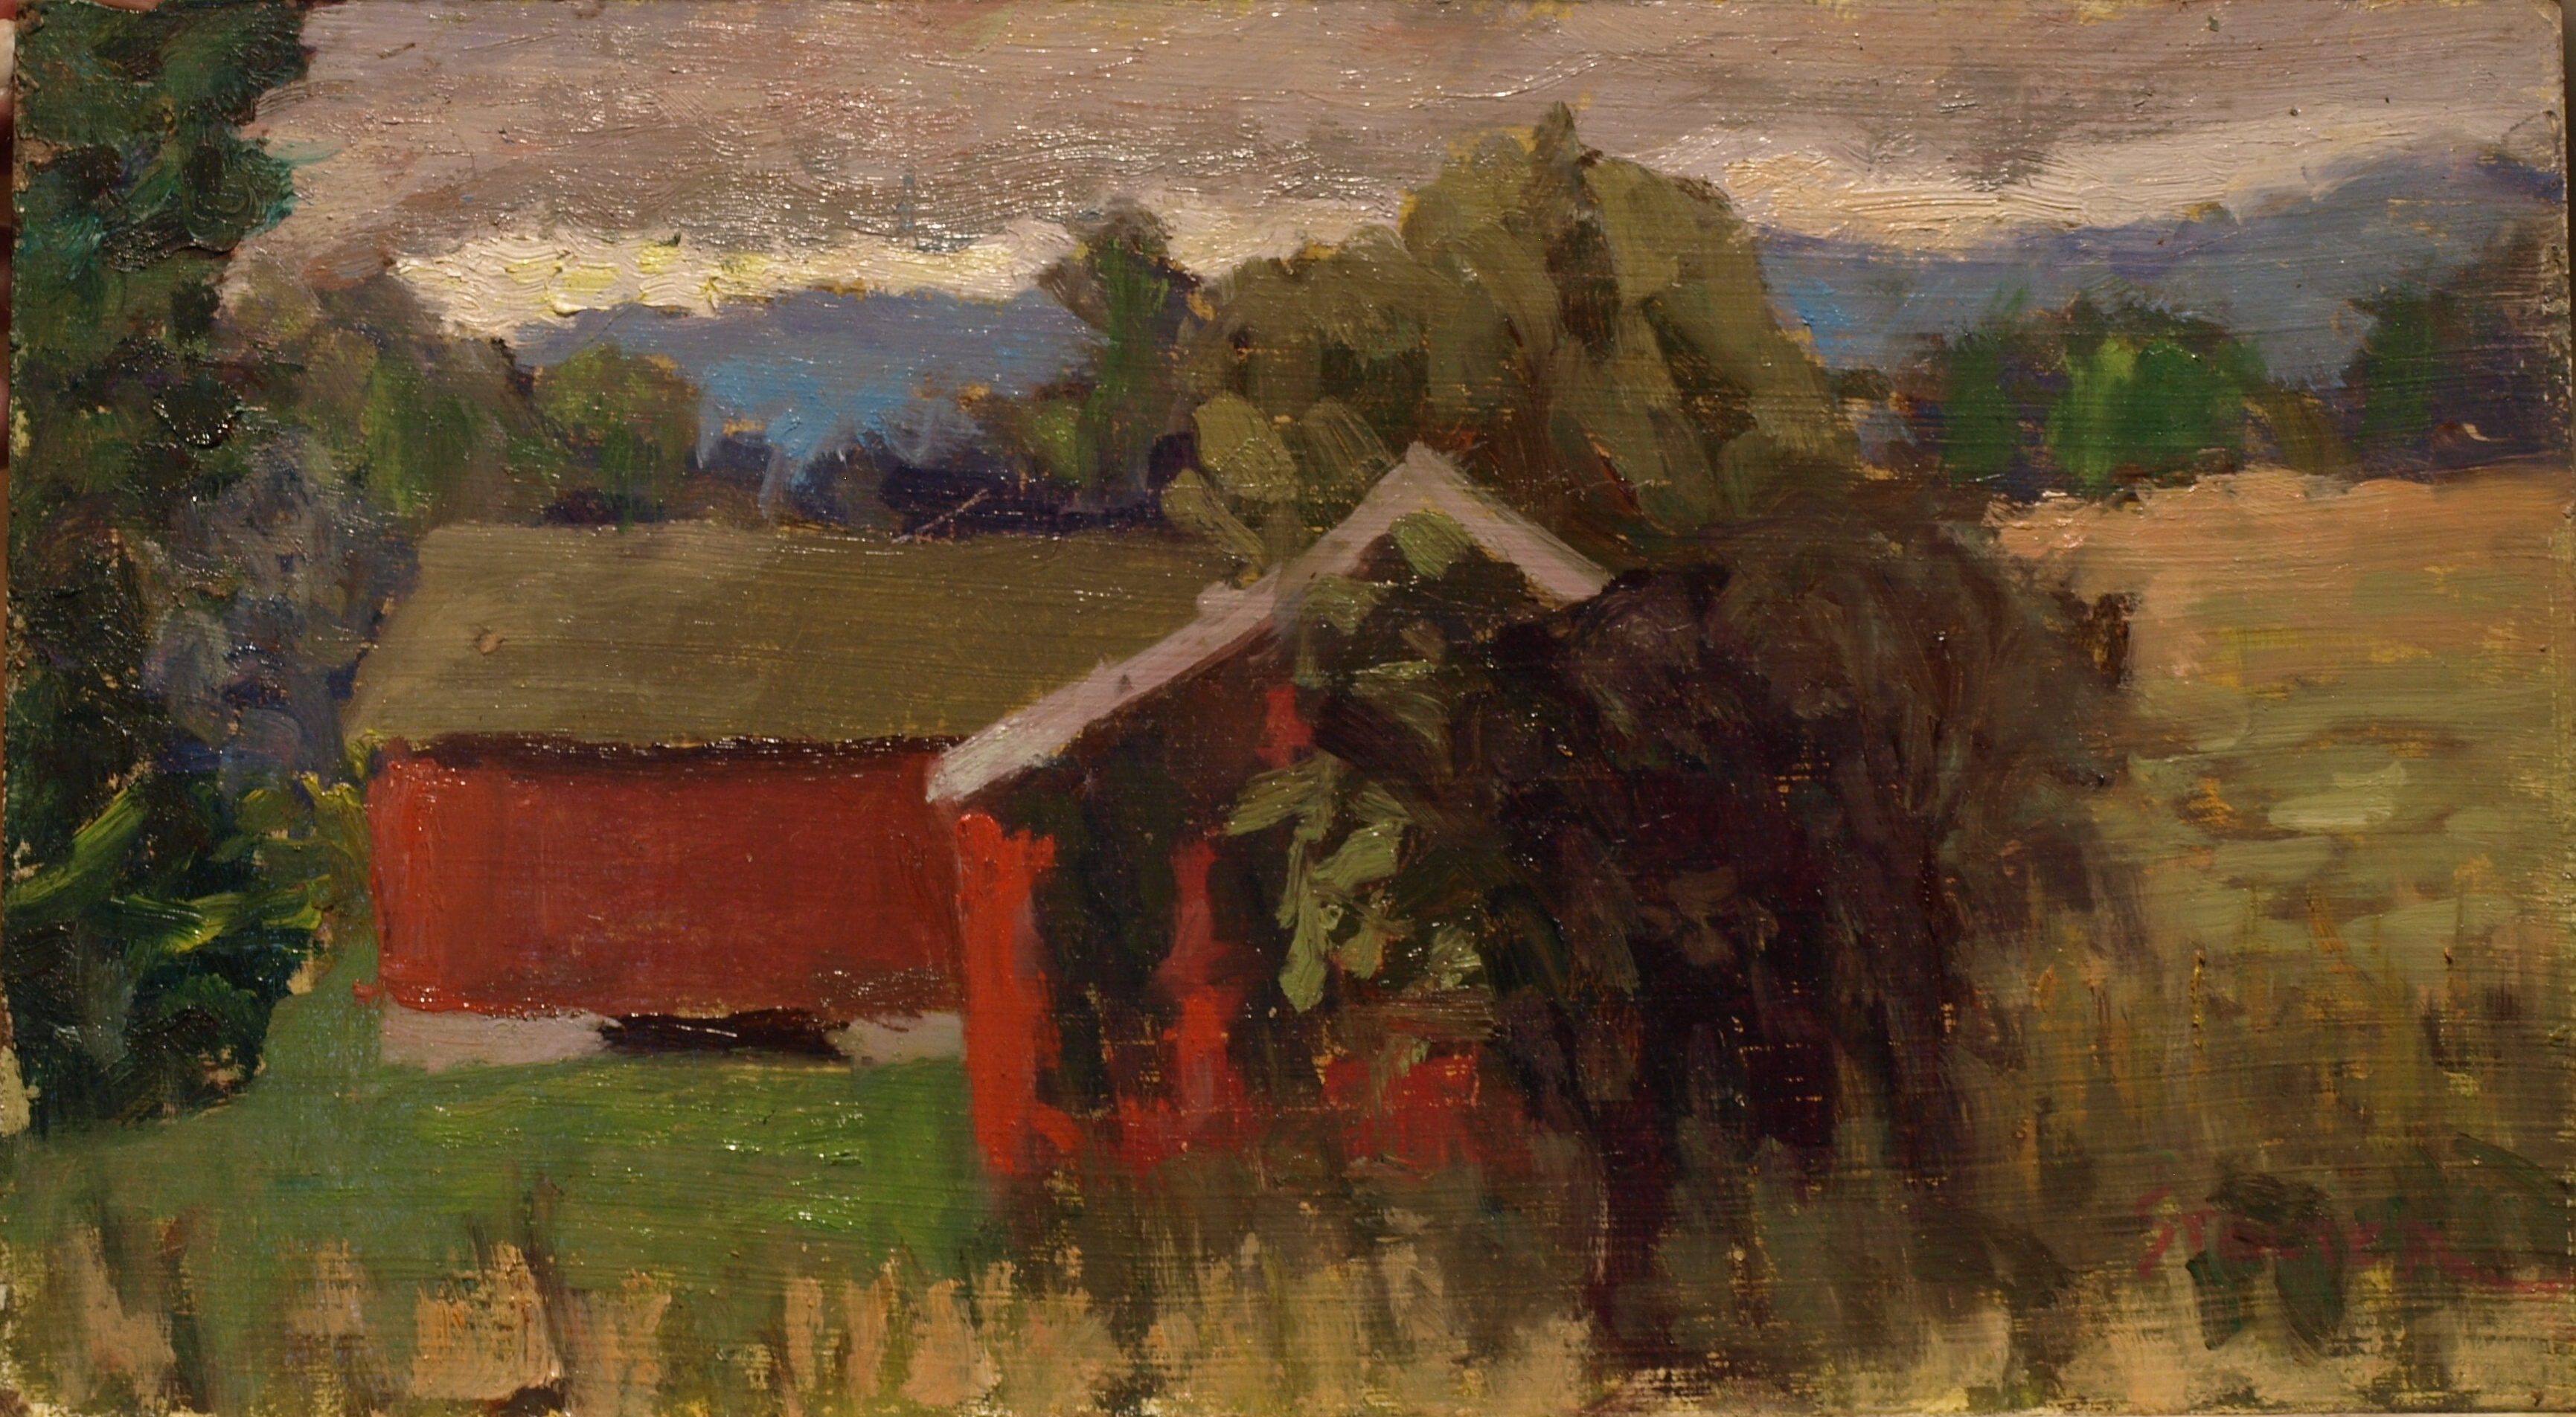 Summer Day -- Osborne's, Oil on Panel, 8 x 14 Inches, by Richard Stalter, $220